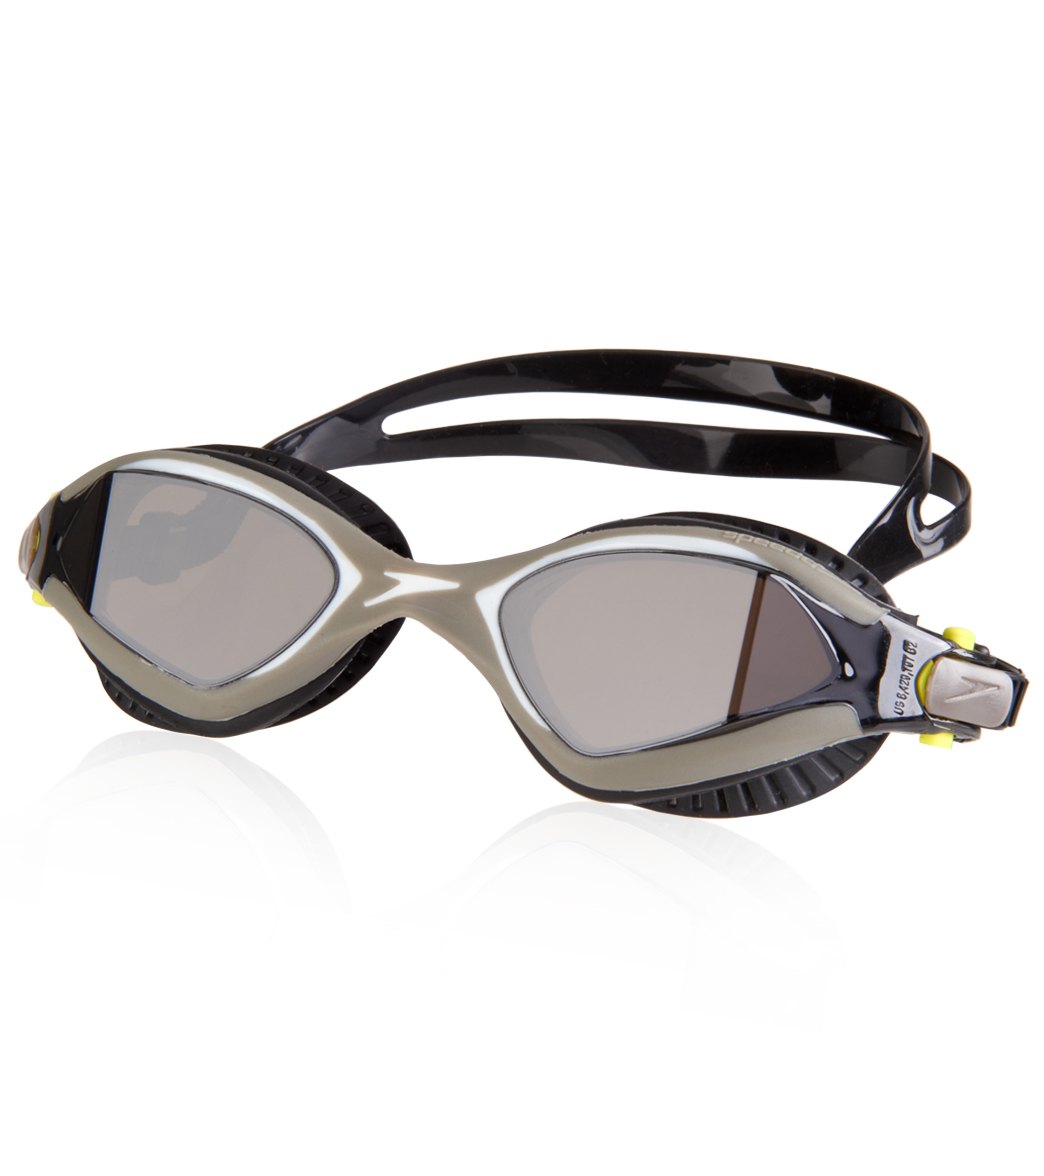 Speedo MDR 2.4 Goggle at SwimOutlet